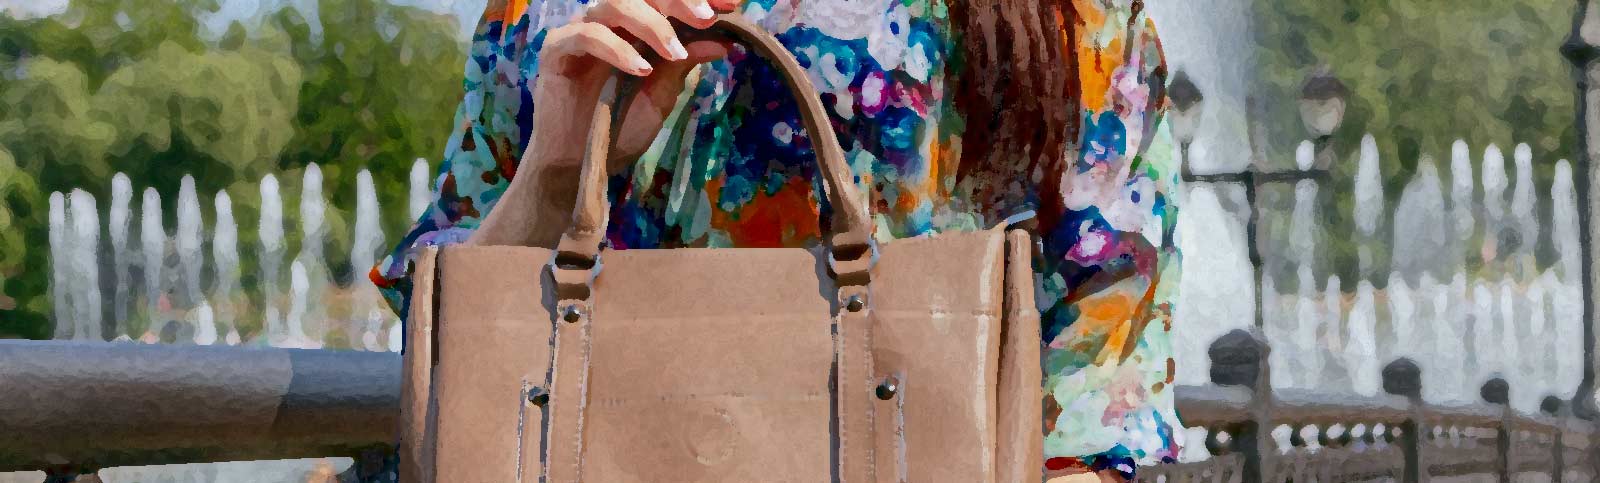 Why Designer Handbags Are Now Seen as an Investment